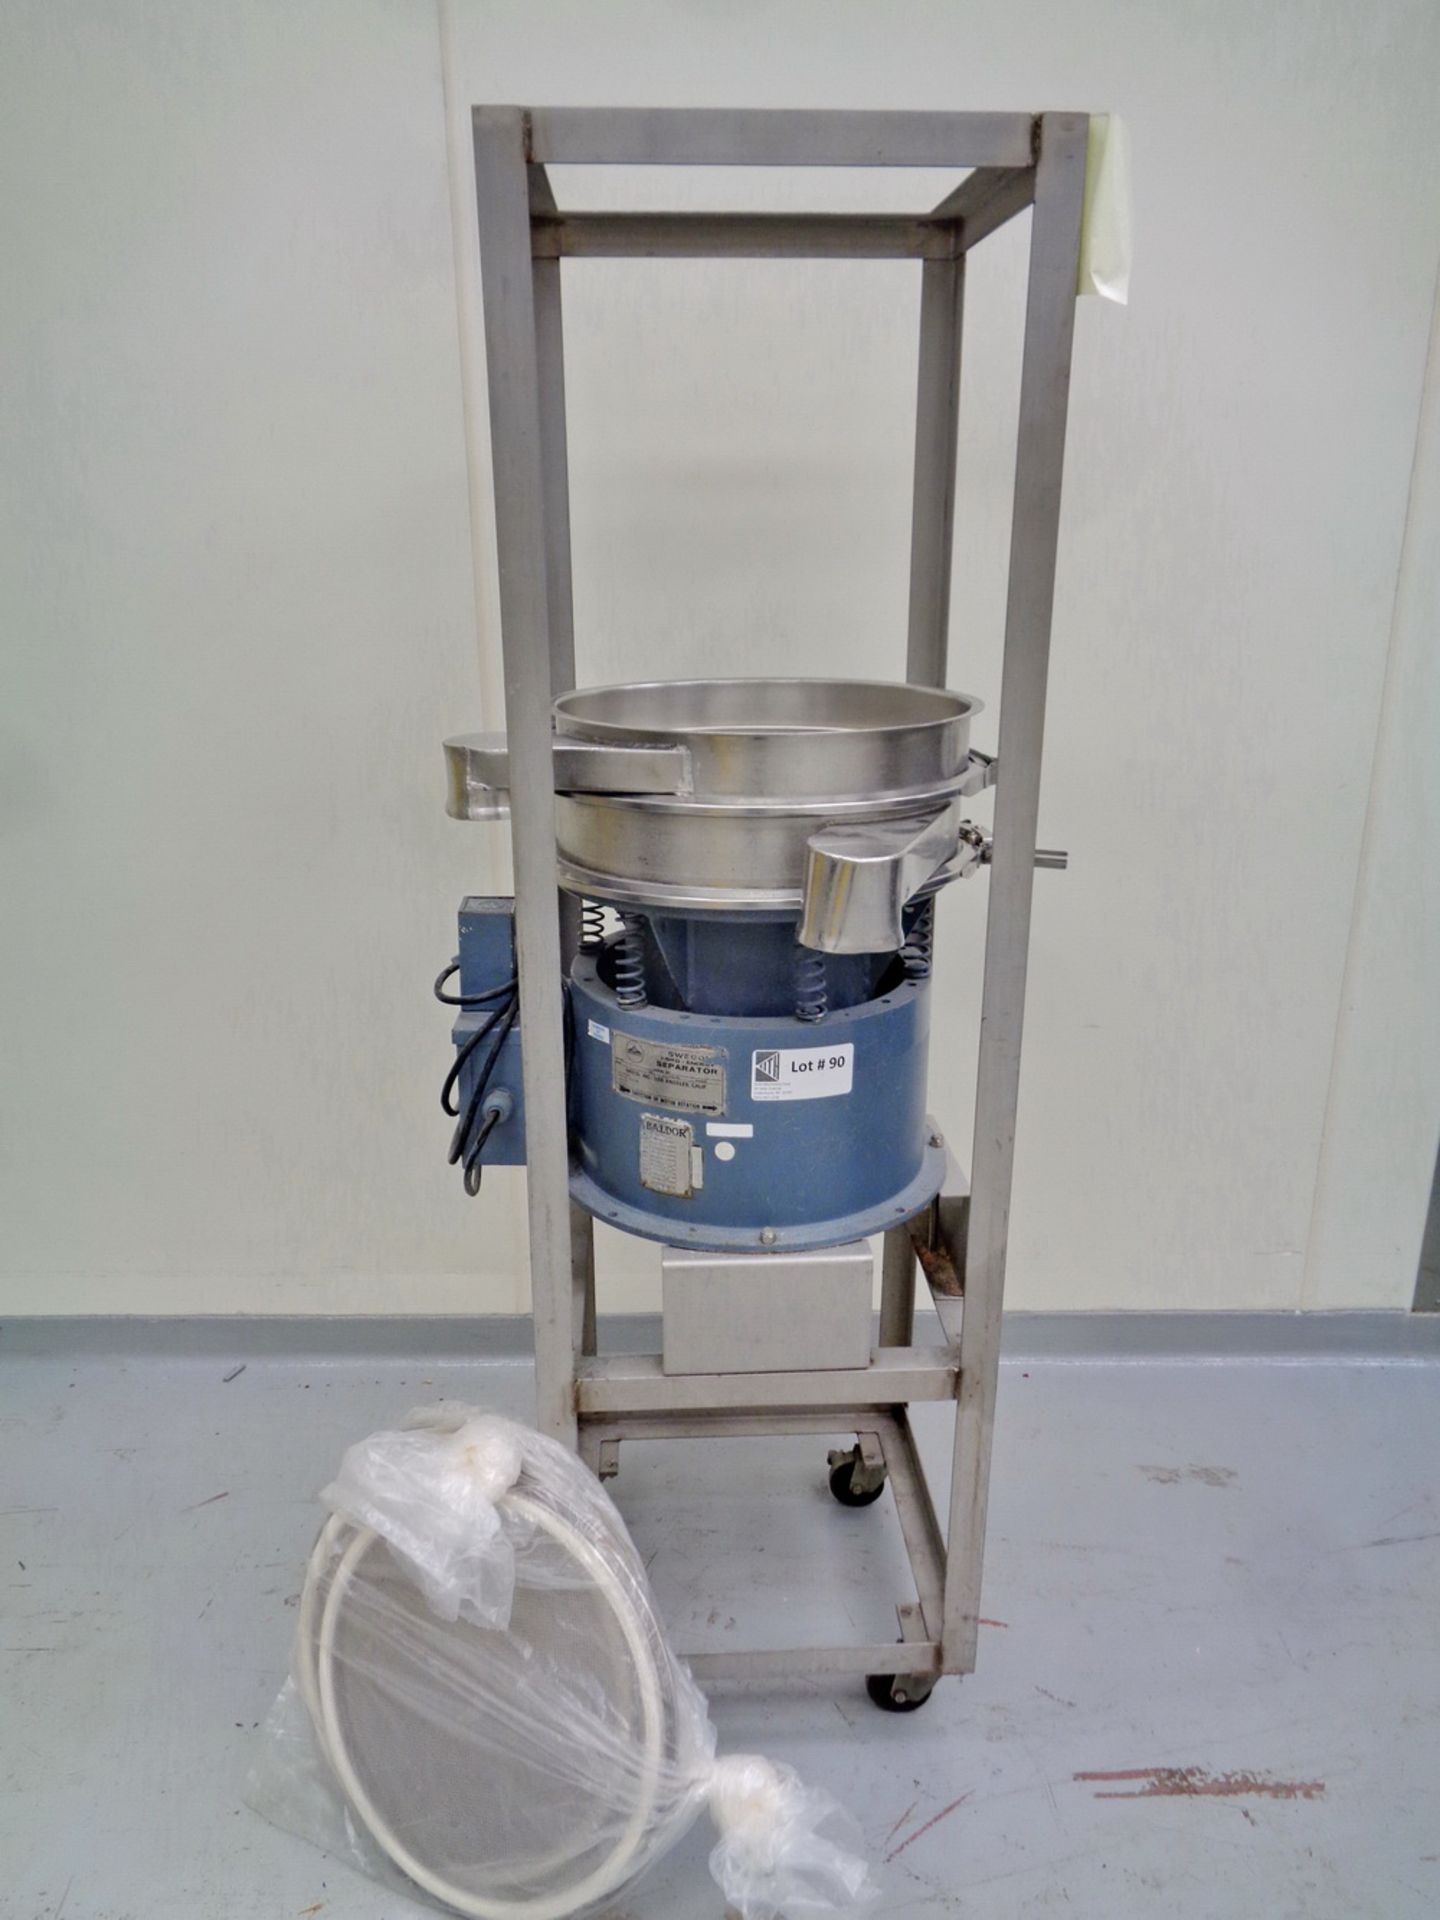 Sweco 18" Double Deck Stainless Steel Sifter, Model LS18S333, S/N LS18-275-37